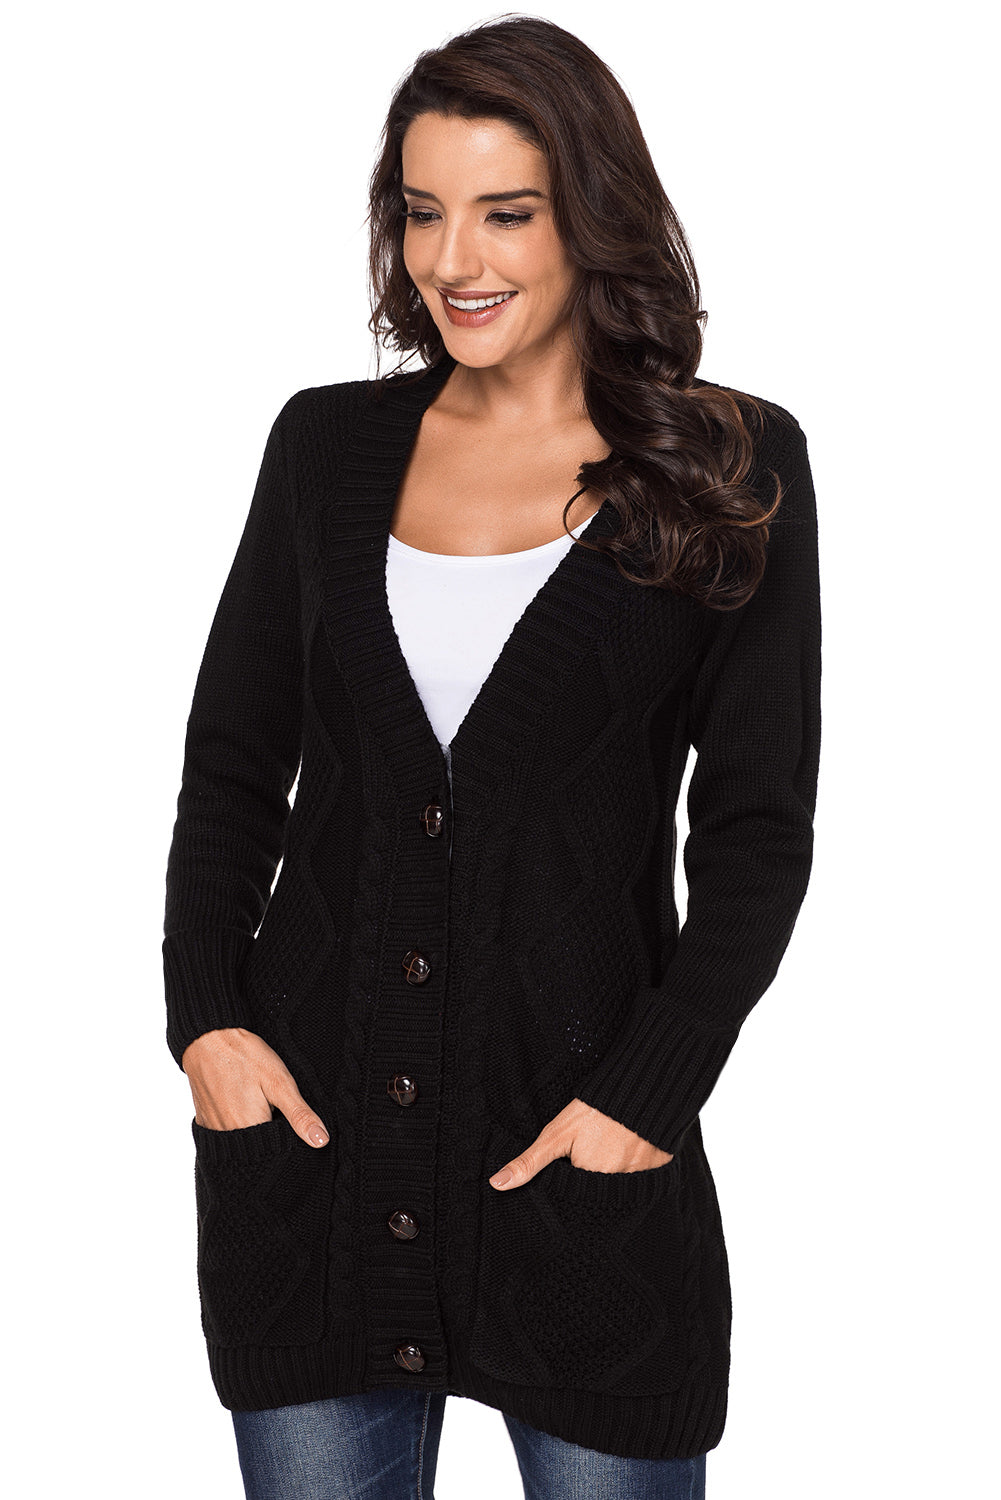 Black Front Pocket and Buttons Closure Cardigan Sweaters & Cardigans JT's Designer Fashion